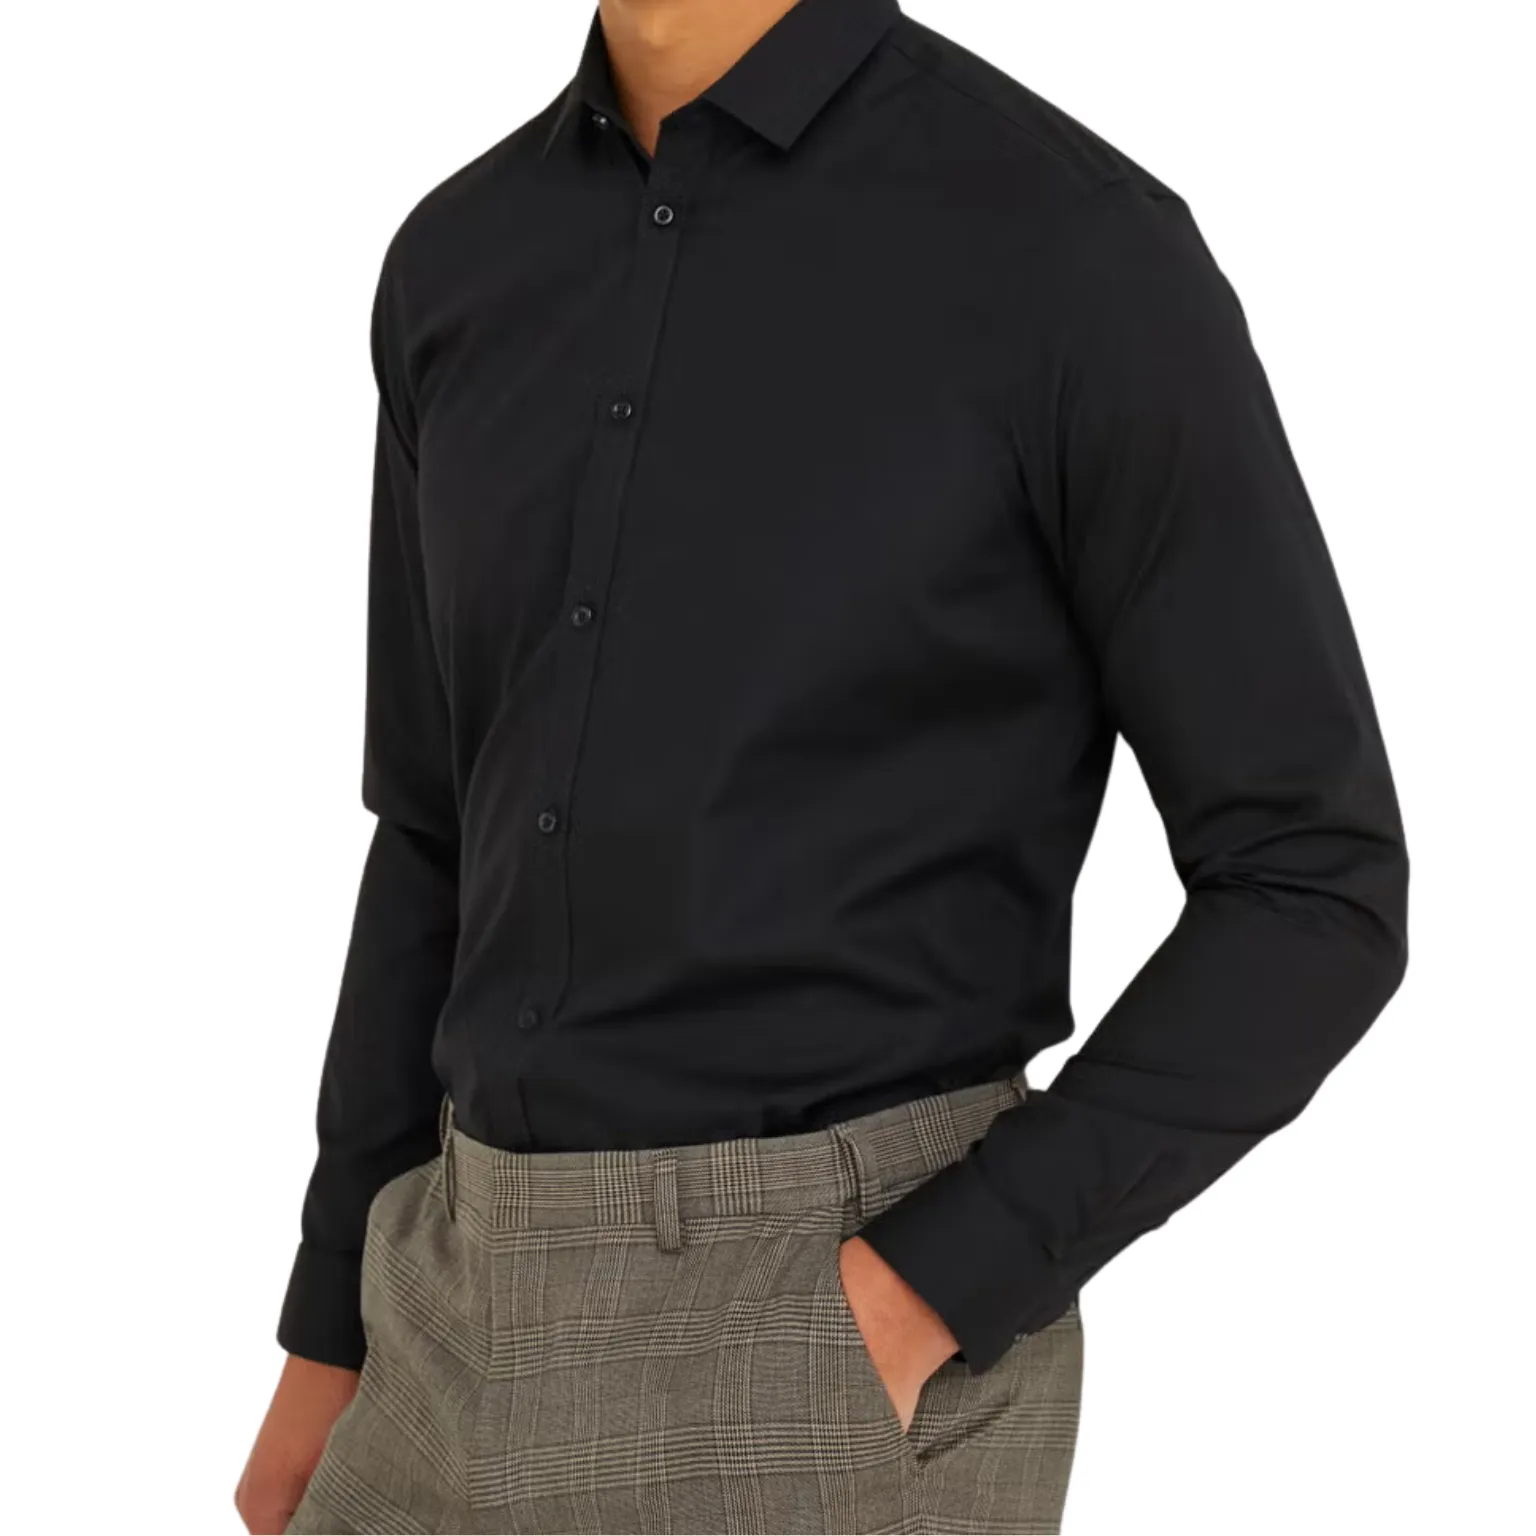 Slim Fit Shirts Manufacturing with superior quality